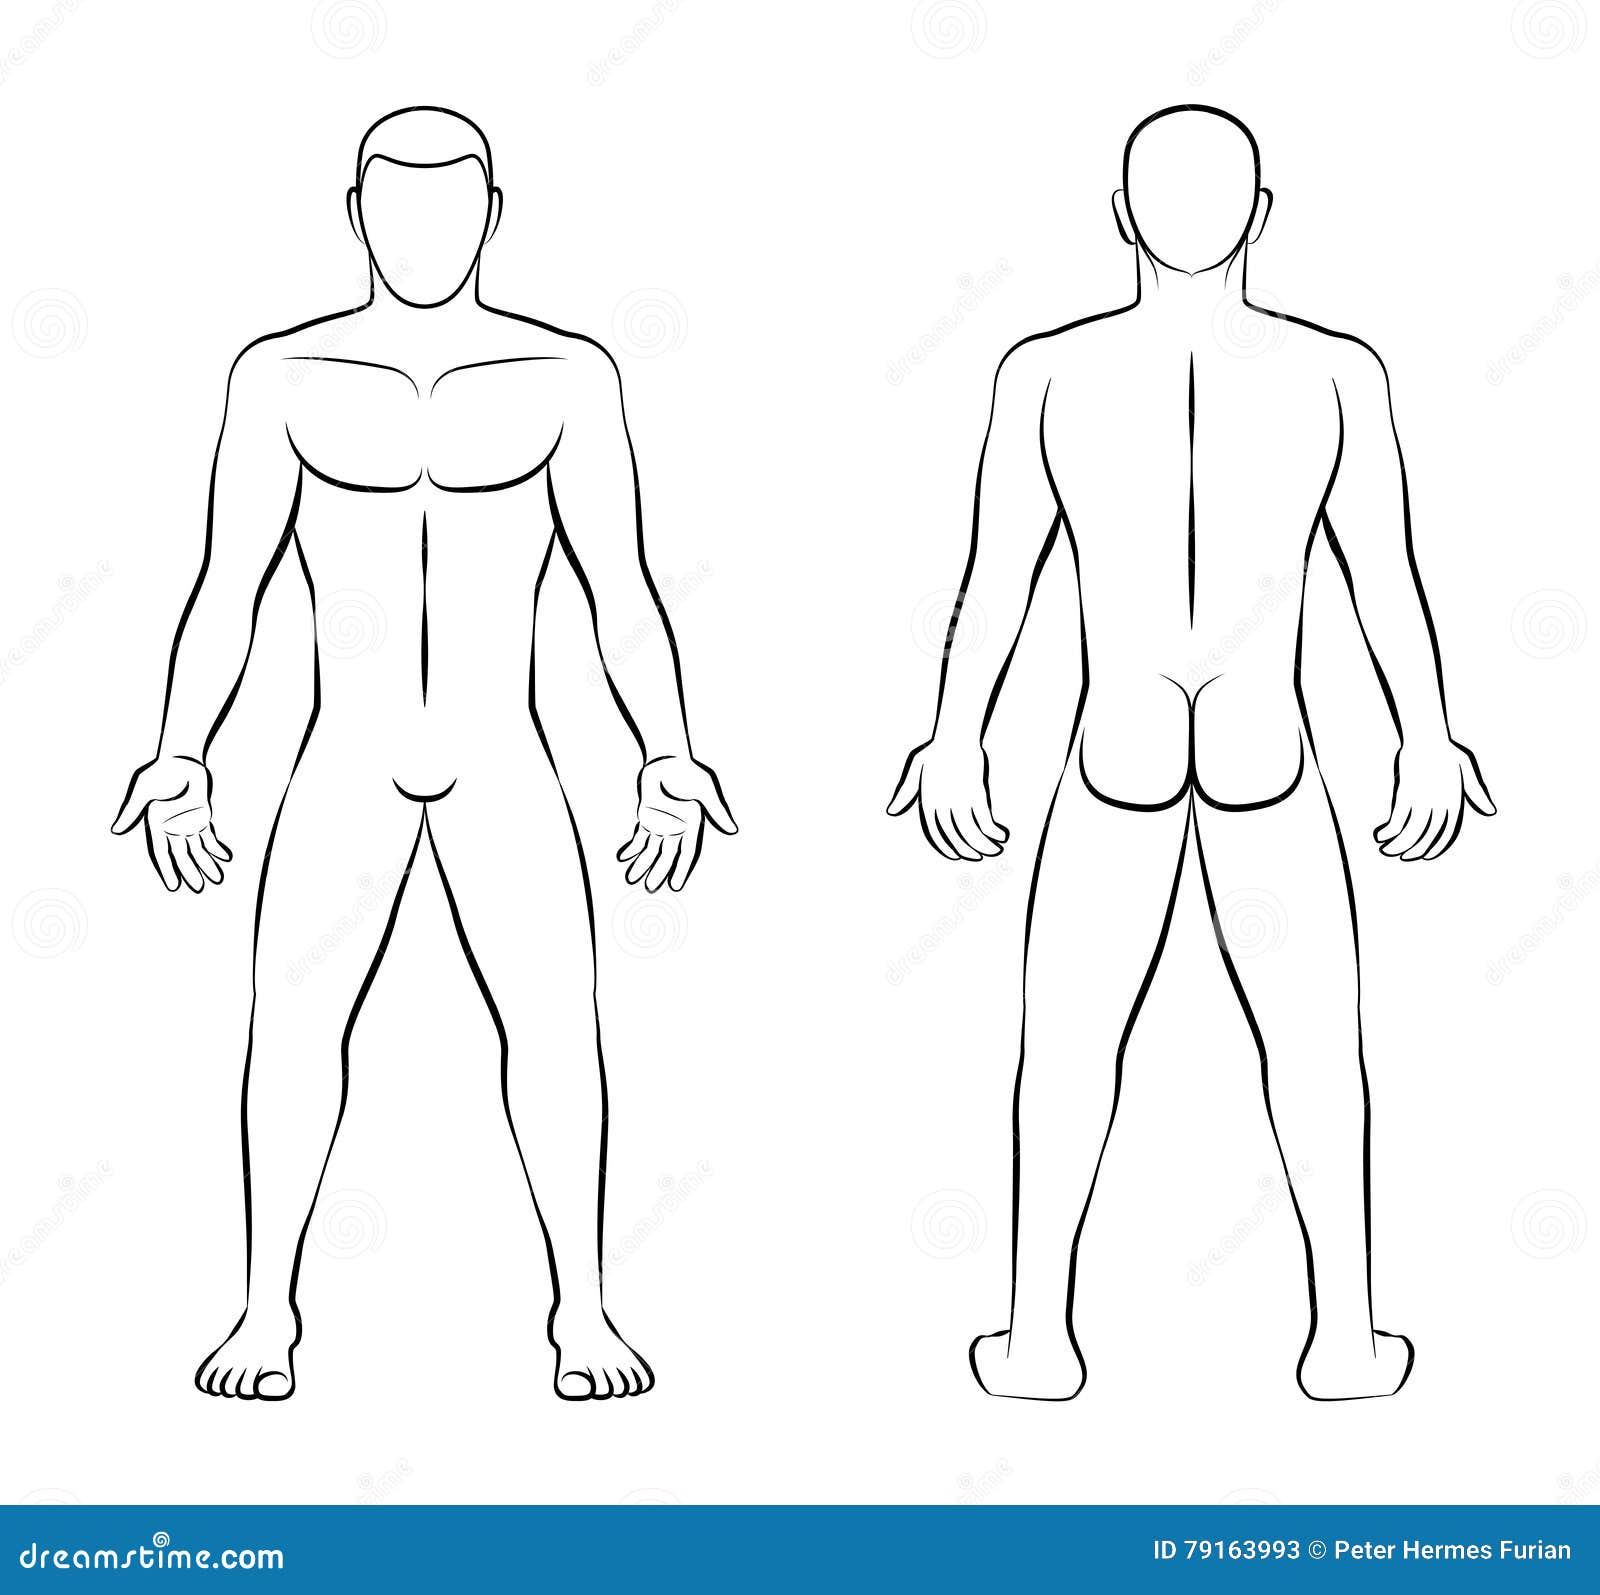 Male Nude Outline